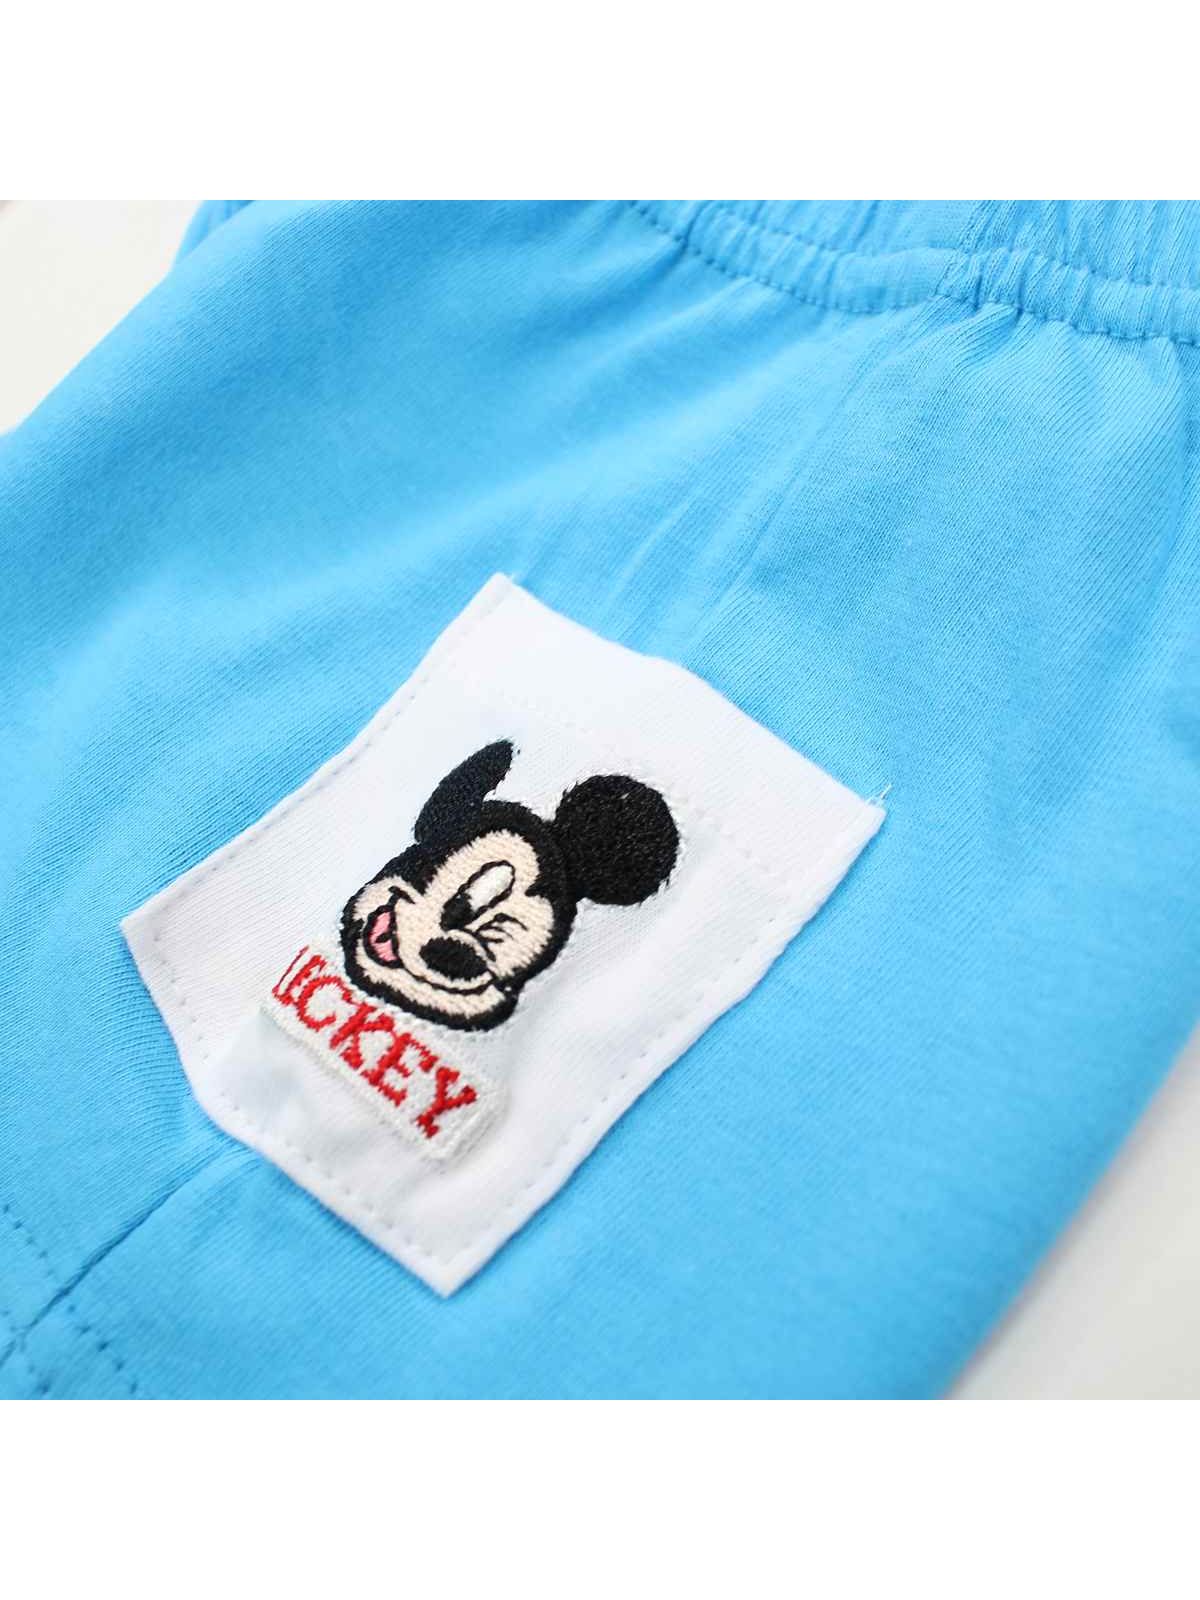 Mickey Clothing of 2 pieces